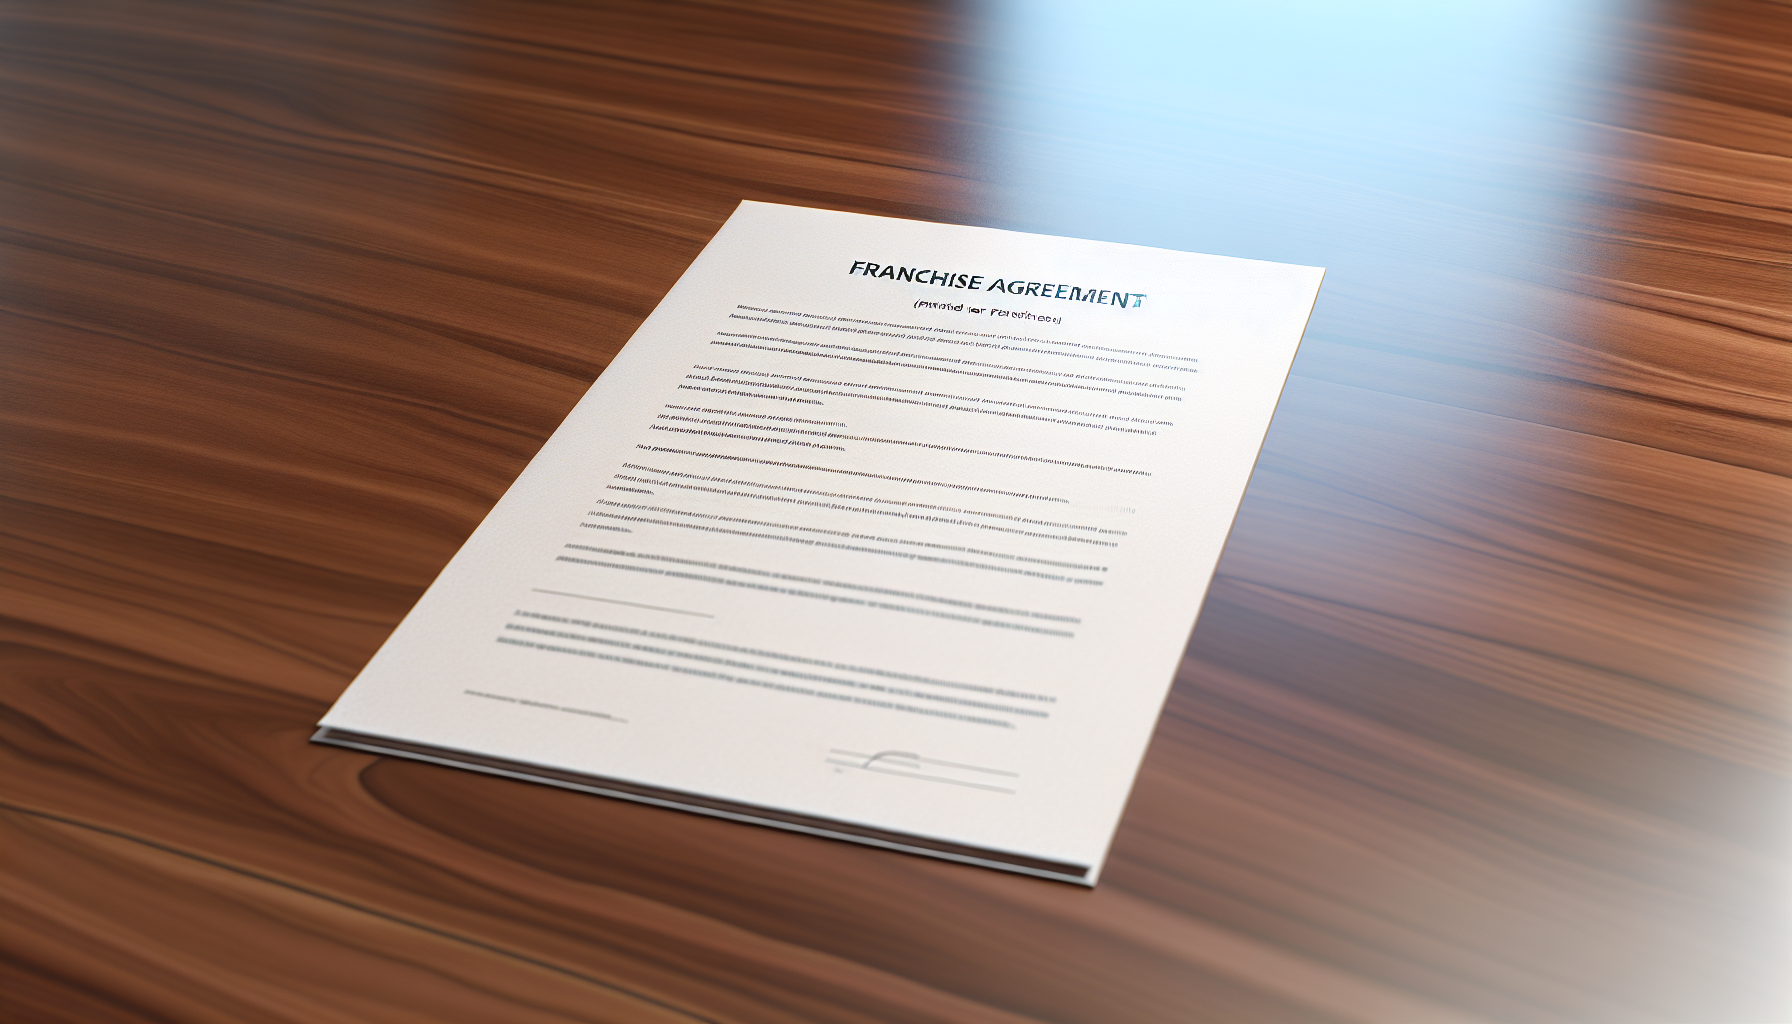 Franchise agreement overview